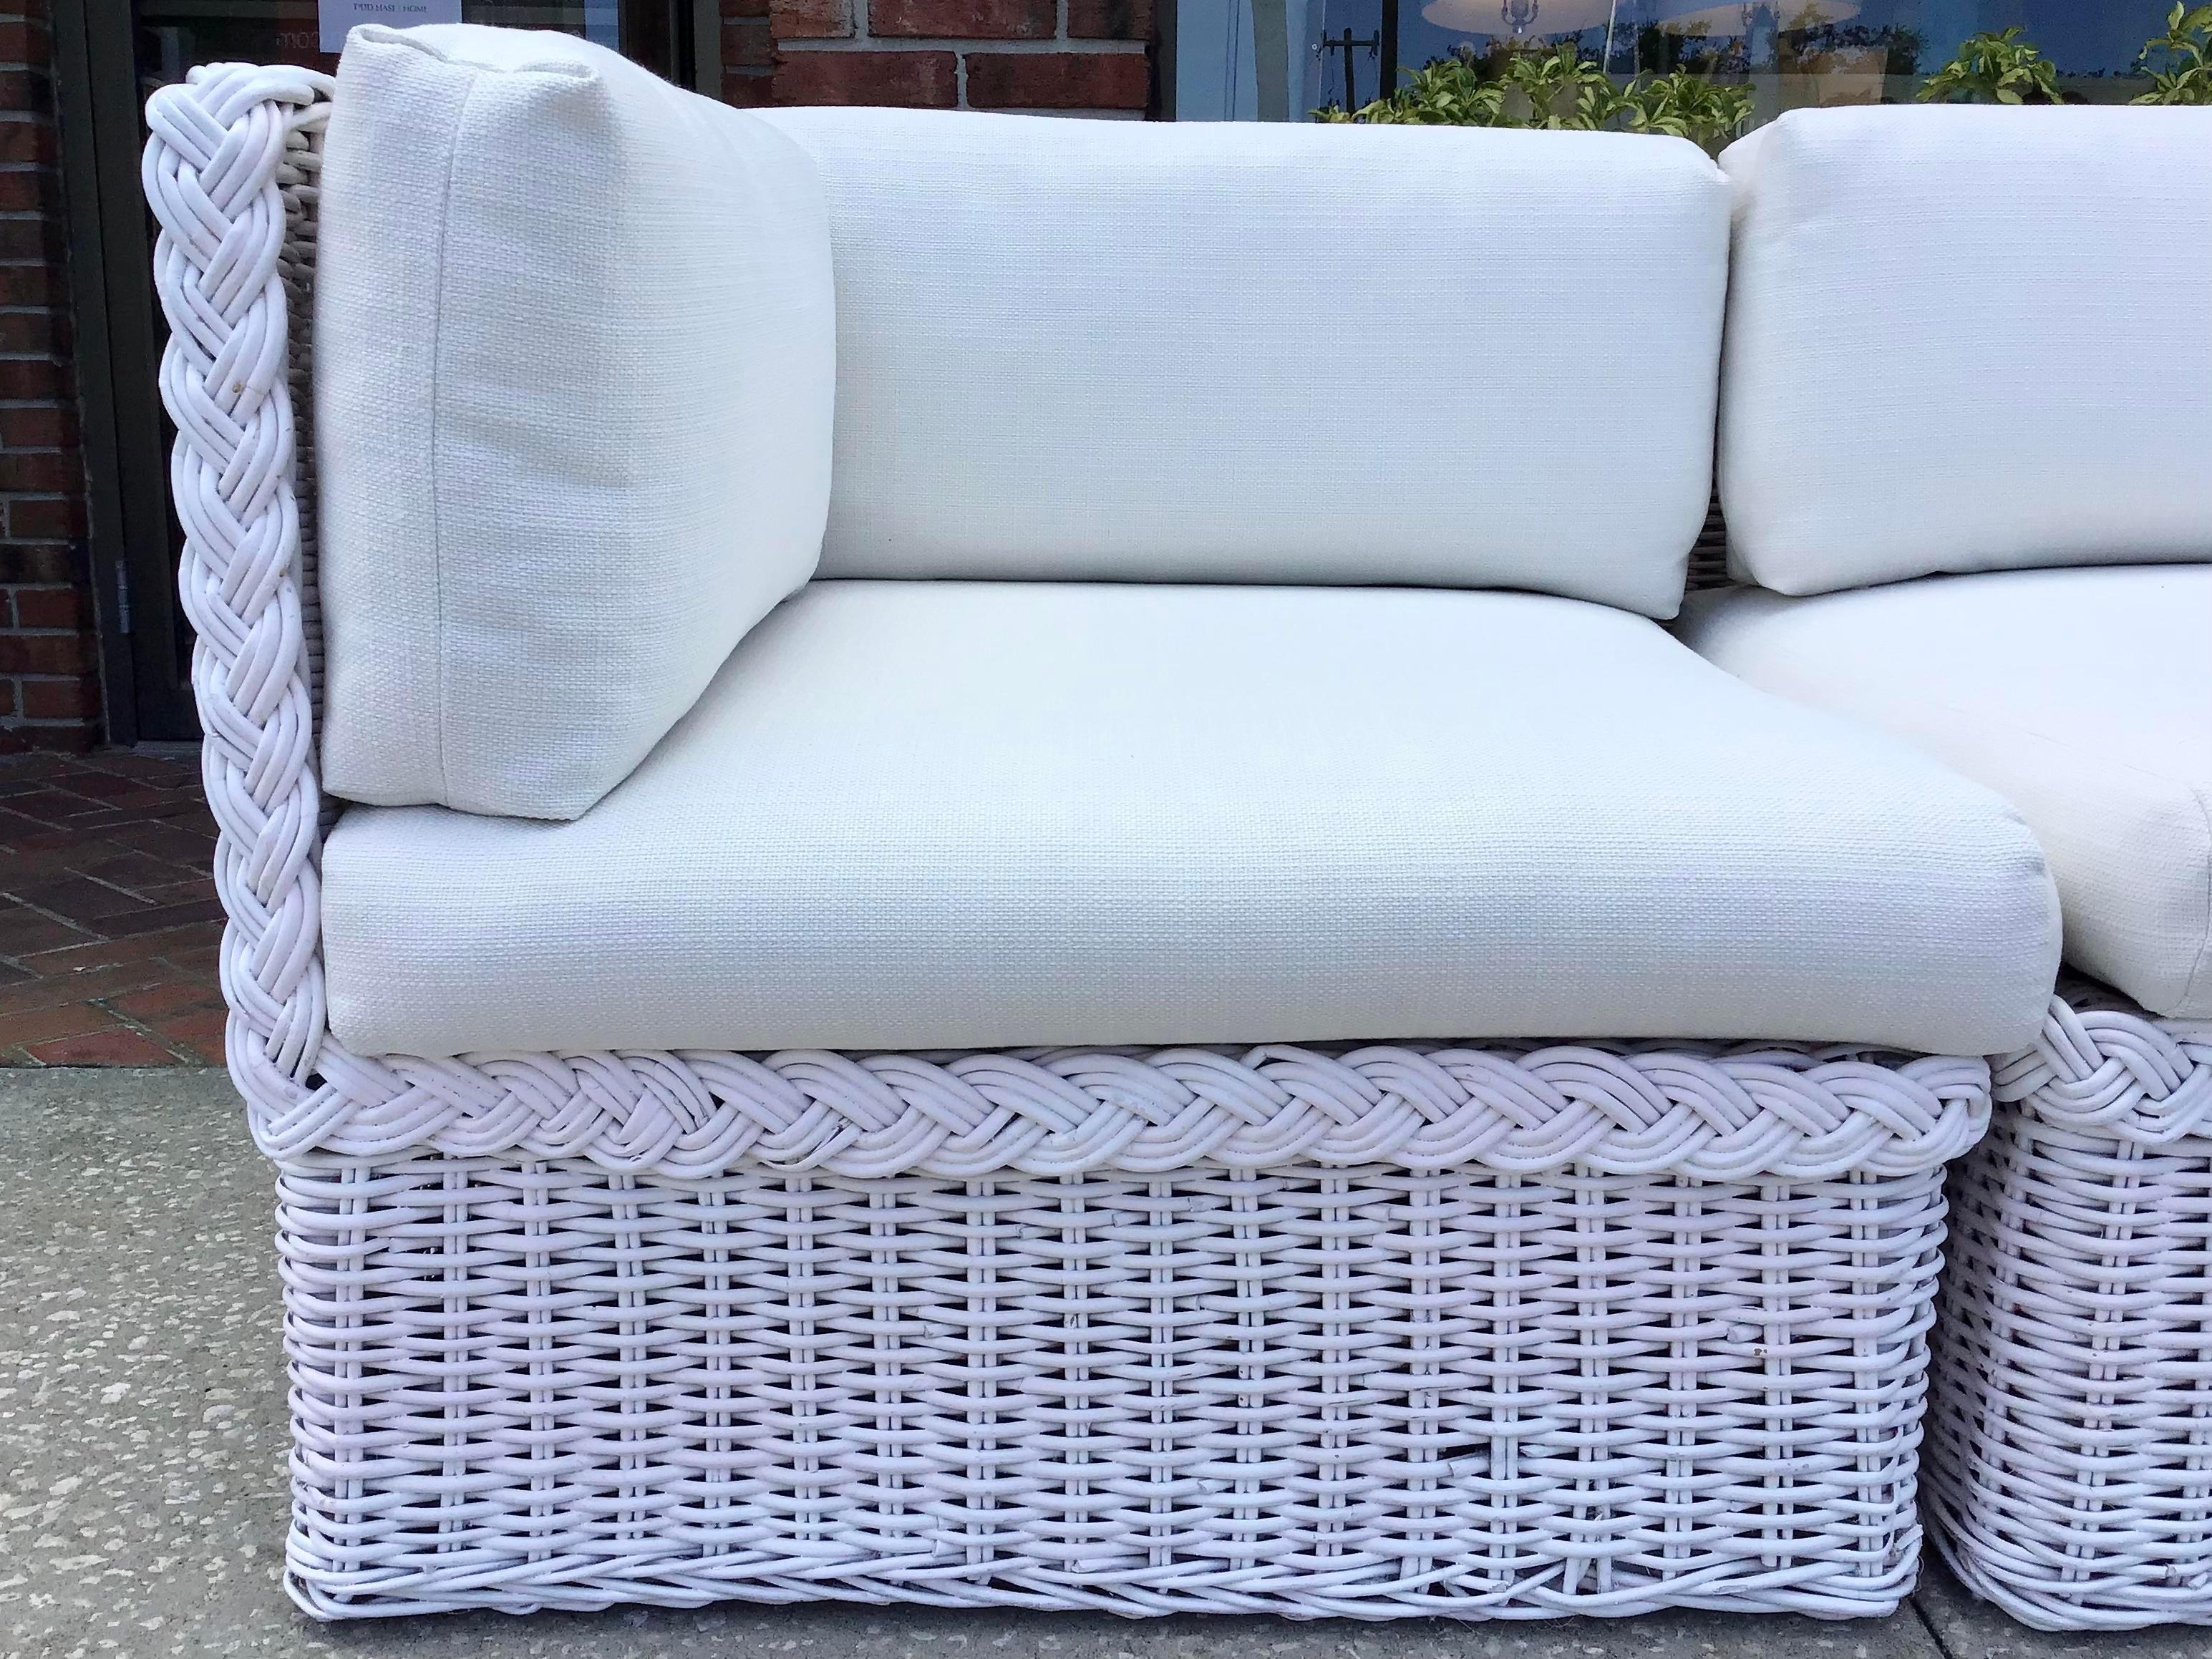 Late 20th Century Bielecky Brothers Boho Chic White Rattan Four Piece Modular Sectional